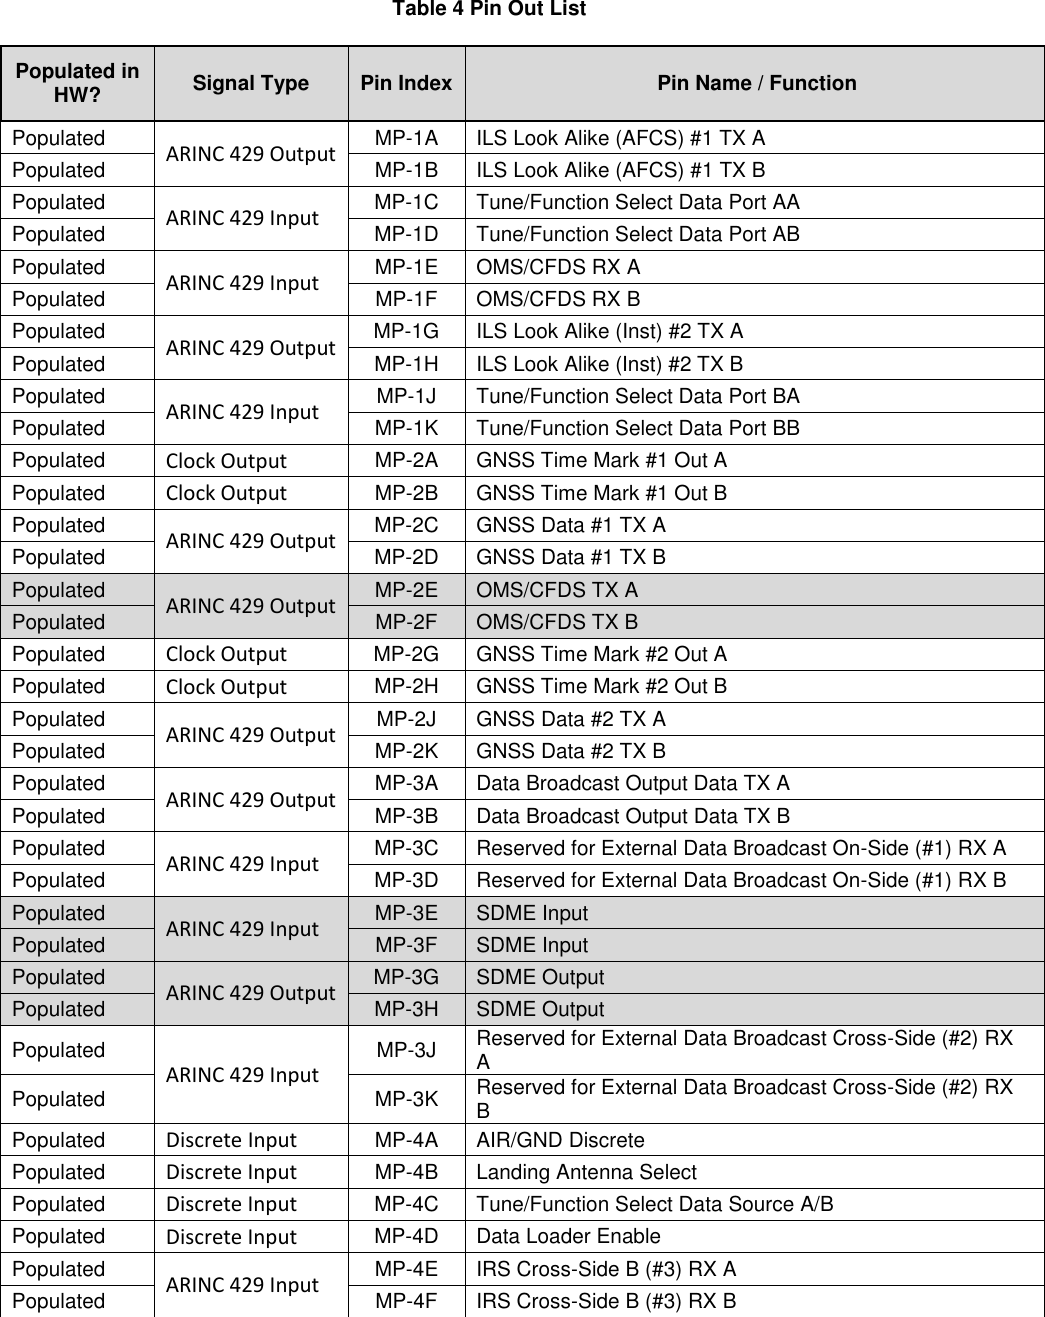 Table 4 Pin Out List Populated in HW? Signal Type Pin Index  Pin Name / Function Populated ARINC 429 Output MP-1A ILS Look Alike (AFCS) #1 TX A Populated MP-1B ILS Look Alike (AFCS) #1 TX B Populated ARINC 429 Input MP-1C Tune/Function Select Data Port AA Populated MP-1D Tune/Function Select Data Port AB Populated ARINC 429 Input MP-1E OMS/CFDS RX A Populated MP-1F OMS/CFDS RX B Populated ARINC 429 Output MP-1G ILS Look Alike (Inst) #2 TX A Populated MP-1H ILS Look Alike (Inst) #2 TX B Populated ARINC 429 Input MP-1J Tune/Function Select Data Port BA Populated MP-1K Tune/Function Select Data Port BB Populated Clock Output MP-2A GNSS Time Mark #1 Out A Populated Clock Output MP-2B GNSS Time Mark #1 Out B Populated ARINC 429 Output MP-2C GNSS Data #1 TX A Populated MP-2D GNSS Data #1 TX B Populated ARINC 429 Output MP-2E OMS/CFDS TX A Populated MP-2F OMS/CFDS TX B Populated Clock Output MP-2G GNSS Time Mark #2 Out A Populated Clock Output MP-2H GNSS Time Mark #2 Out B Populated ARINC 429 Output MP-2J GNSS Data #2 TX A Populated MP-2K GNSS Data #2 TX B Populated ARINC 429 Output MP-3A Data Broadcast Output Data TX A Populated MP-3B Data Broadcast Output Data TX B Populated ARINC 429 Input MP-3C Reserved for External Data Broadcast On-Side (#1) RX A Populated MP-3D Reserved for External Data Broadcast On-Side (#1) RX B Populated ARINC 429 Input MP-3E SDME Input Populated MP-3F SDME Input Populated ARINC 429 Output MP-3G SDME Output Populated MP-3H SDME Output Populated ARINC 429 Input MP-3J Reserved for External Data Broadcast Cross-Side (#2) RX A Populated MP-3K Reserved for External Data Broadcast Cross-Side (#2) RX B Populated Discrete Input MP-4A AIR/GND Discrete Populated Discrete Input MP-4B Landing Antenna Select Populated Discrete Input MP-4C Tune/Function Select Data Source A/B Populated Discrete Input MP-4D Data Loader Enable Populated ARINC 429 Input MP-4E IRS Cross-Side B (#3) RX A Populated MP-4F IRS Cross-Side B (#3) RX B 